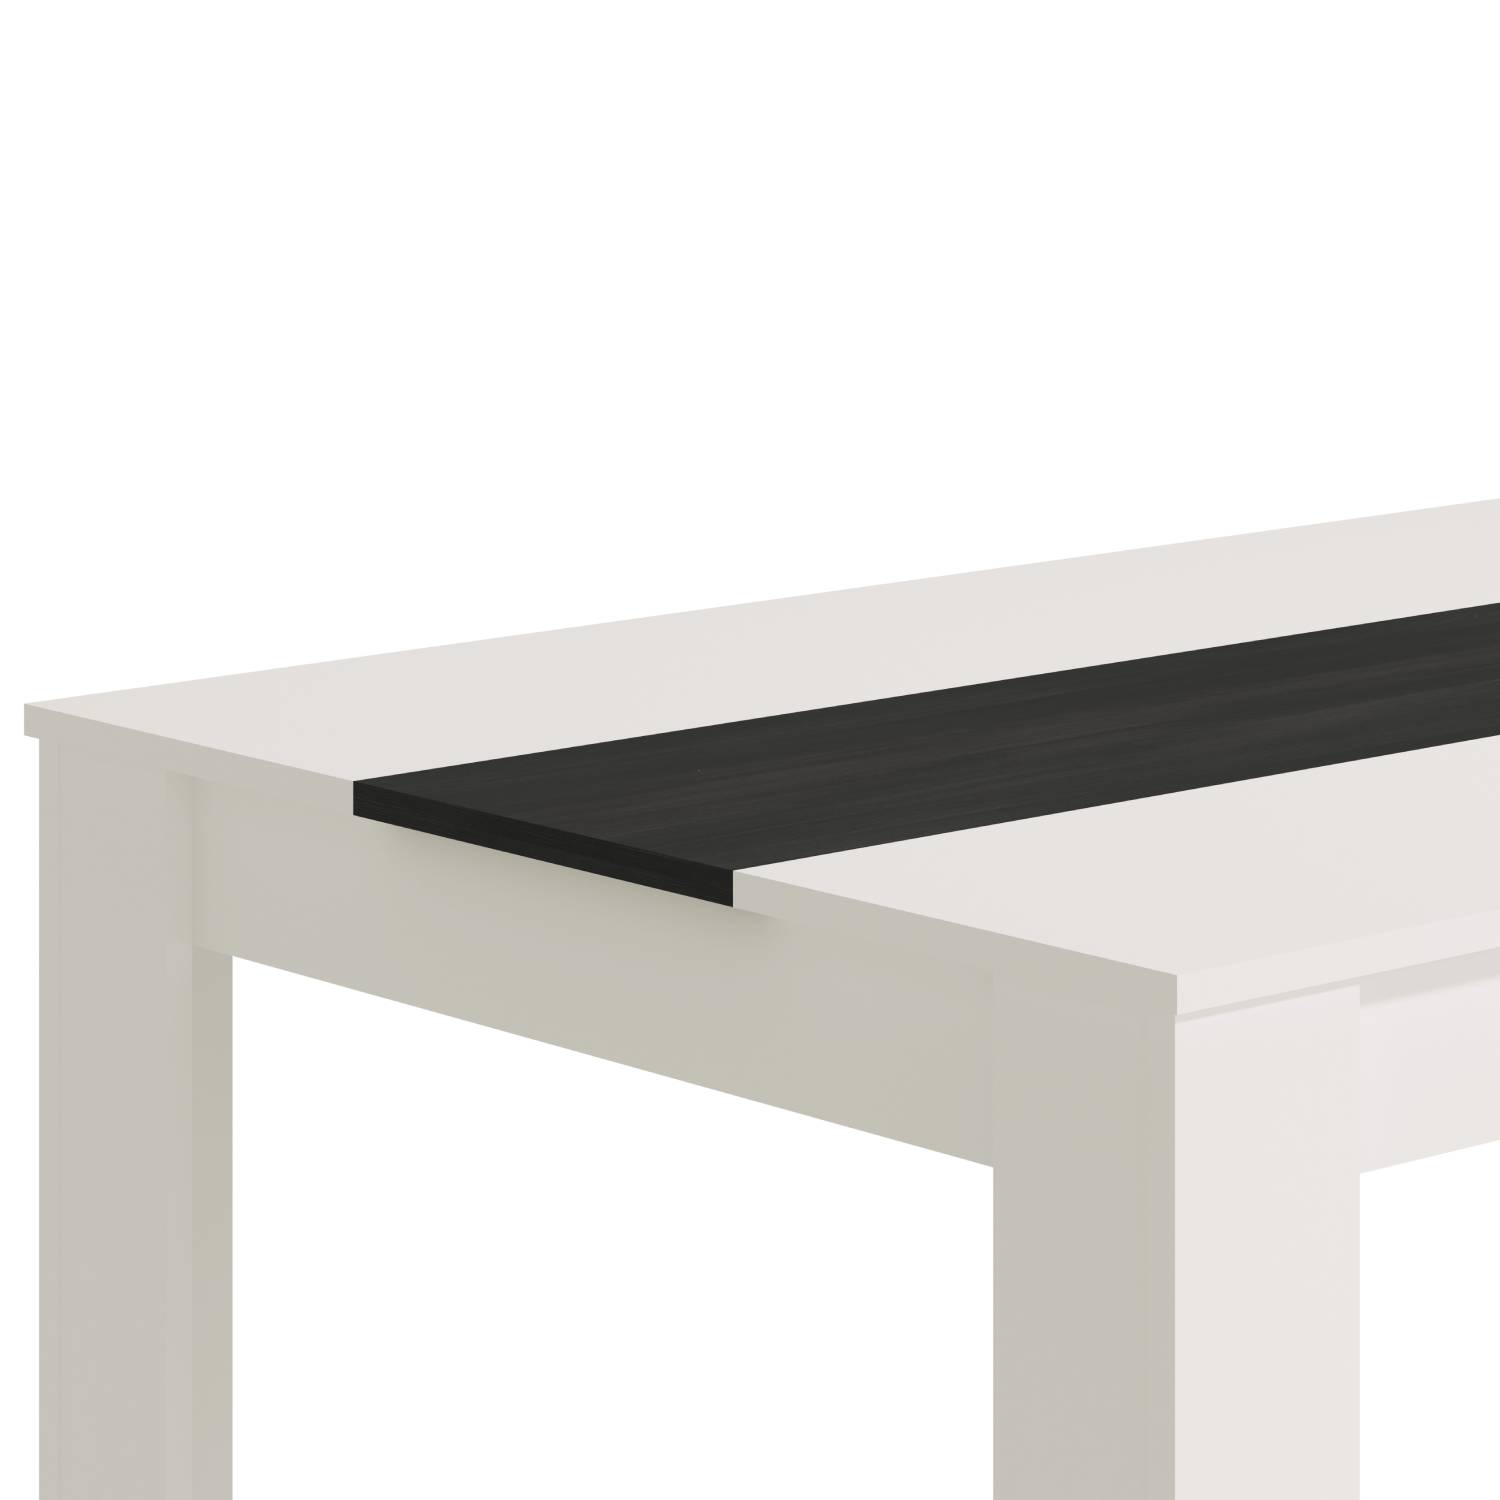 Modern Dining Table Kitchen Table Wooden Table 135x80 cm White Black 6 Seater